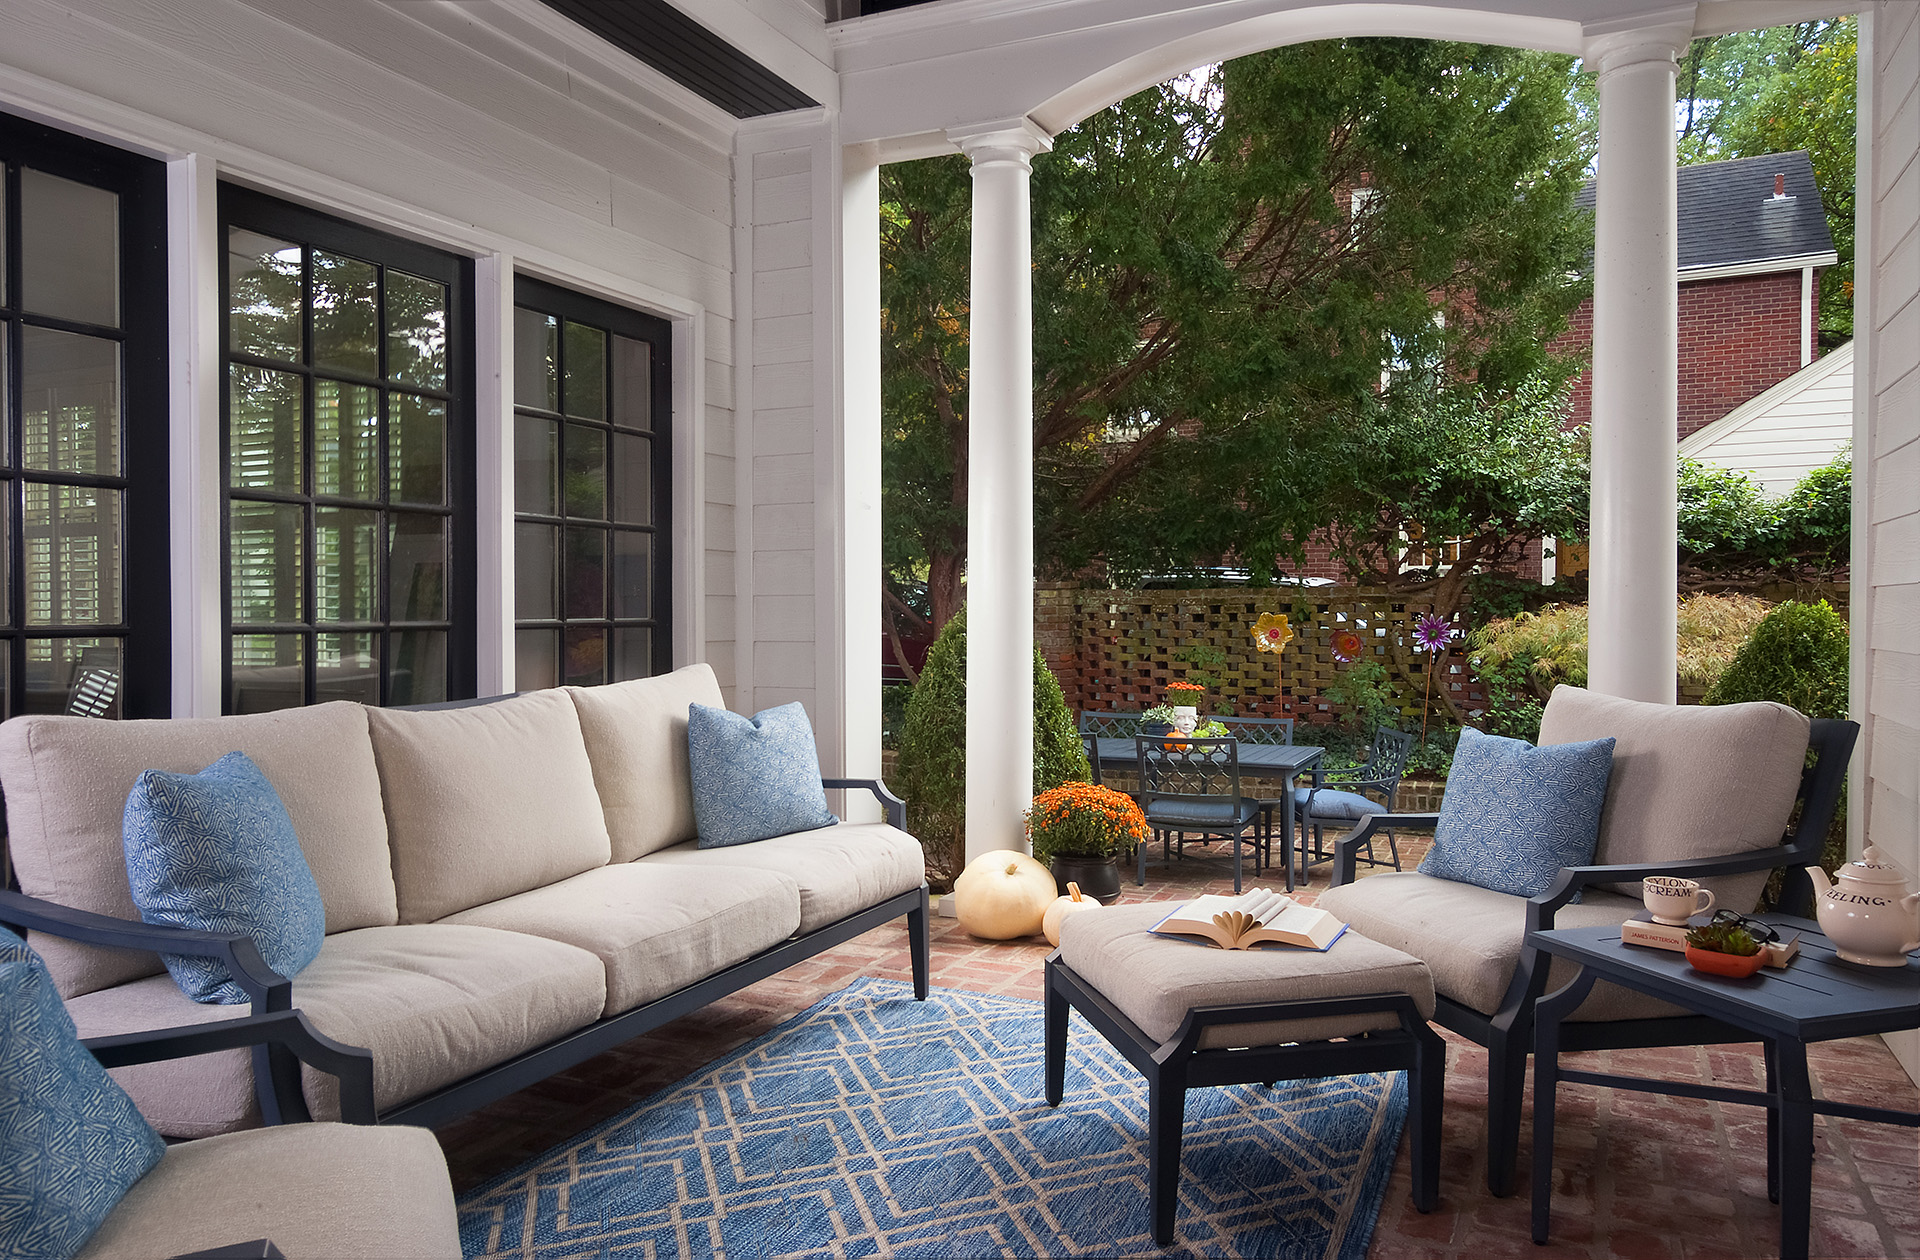 How to prepare your patio for fall